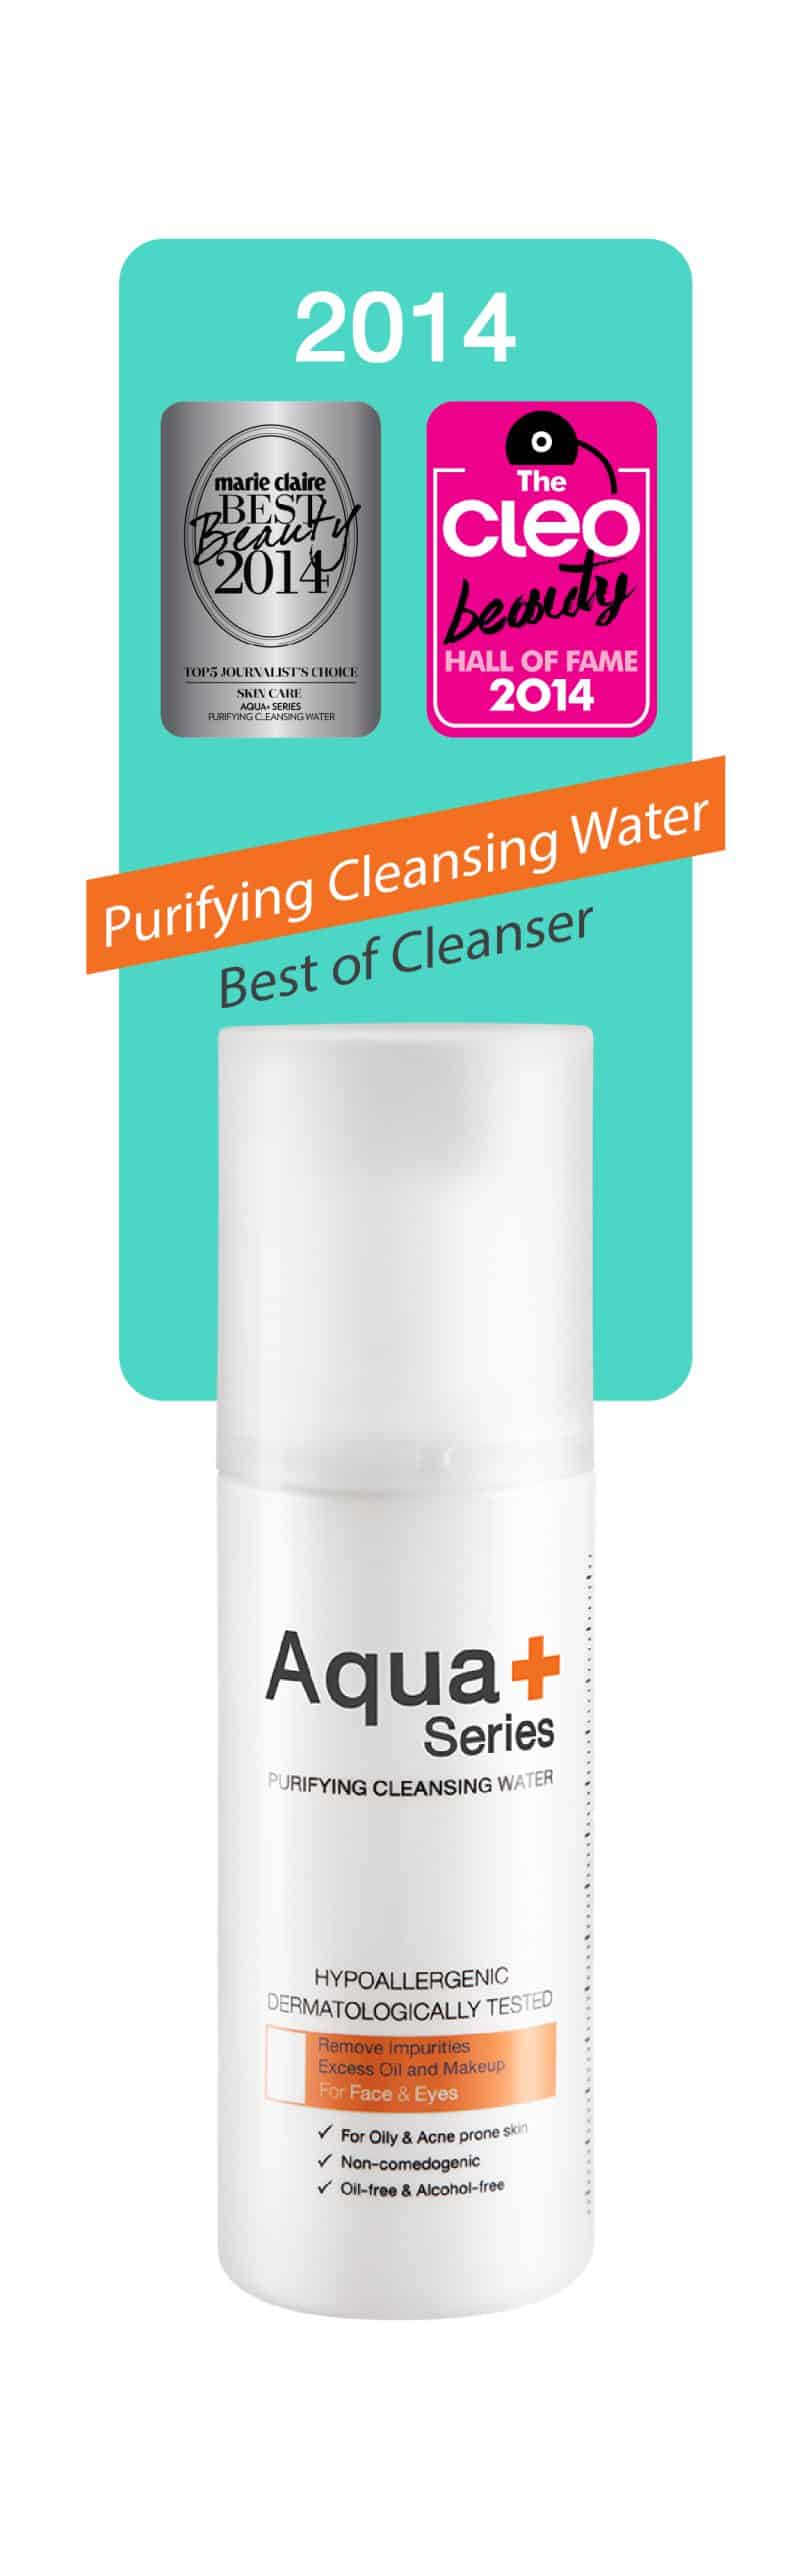 Purifying Cleansing Water